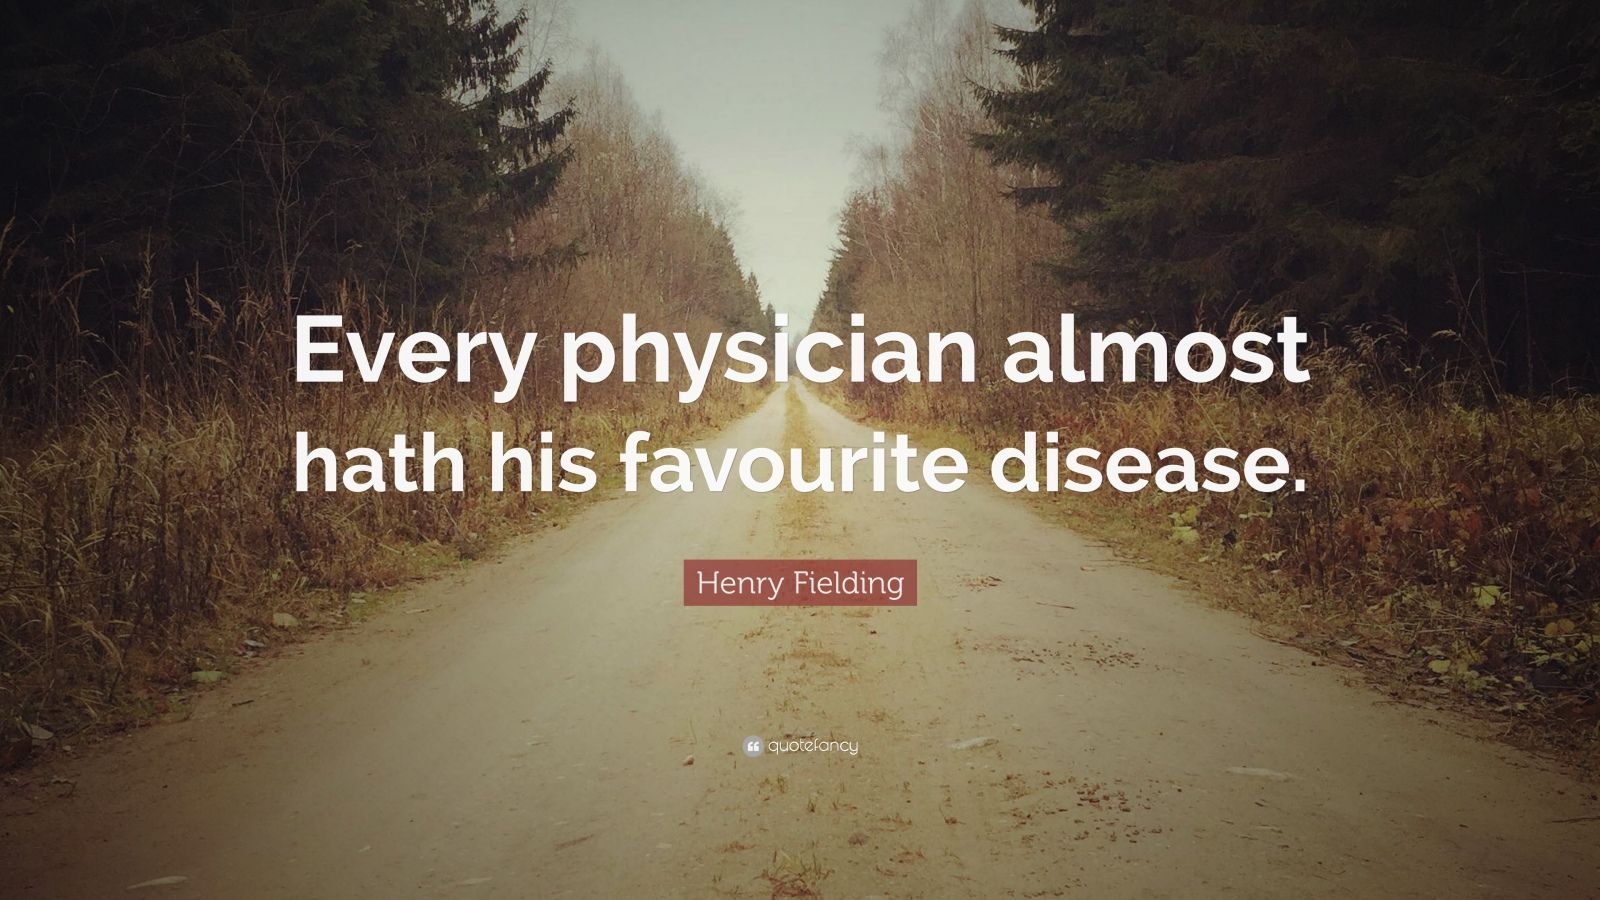 Top 160 Henry Fielding Quotes | 2021 Edition | Free Images - QuoteFancy